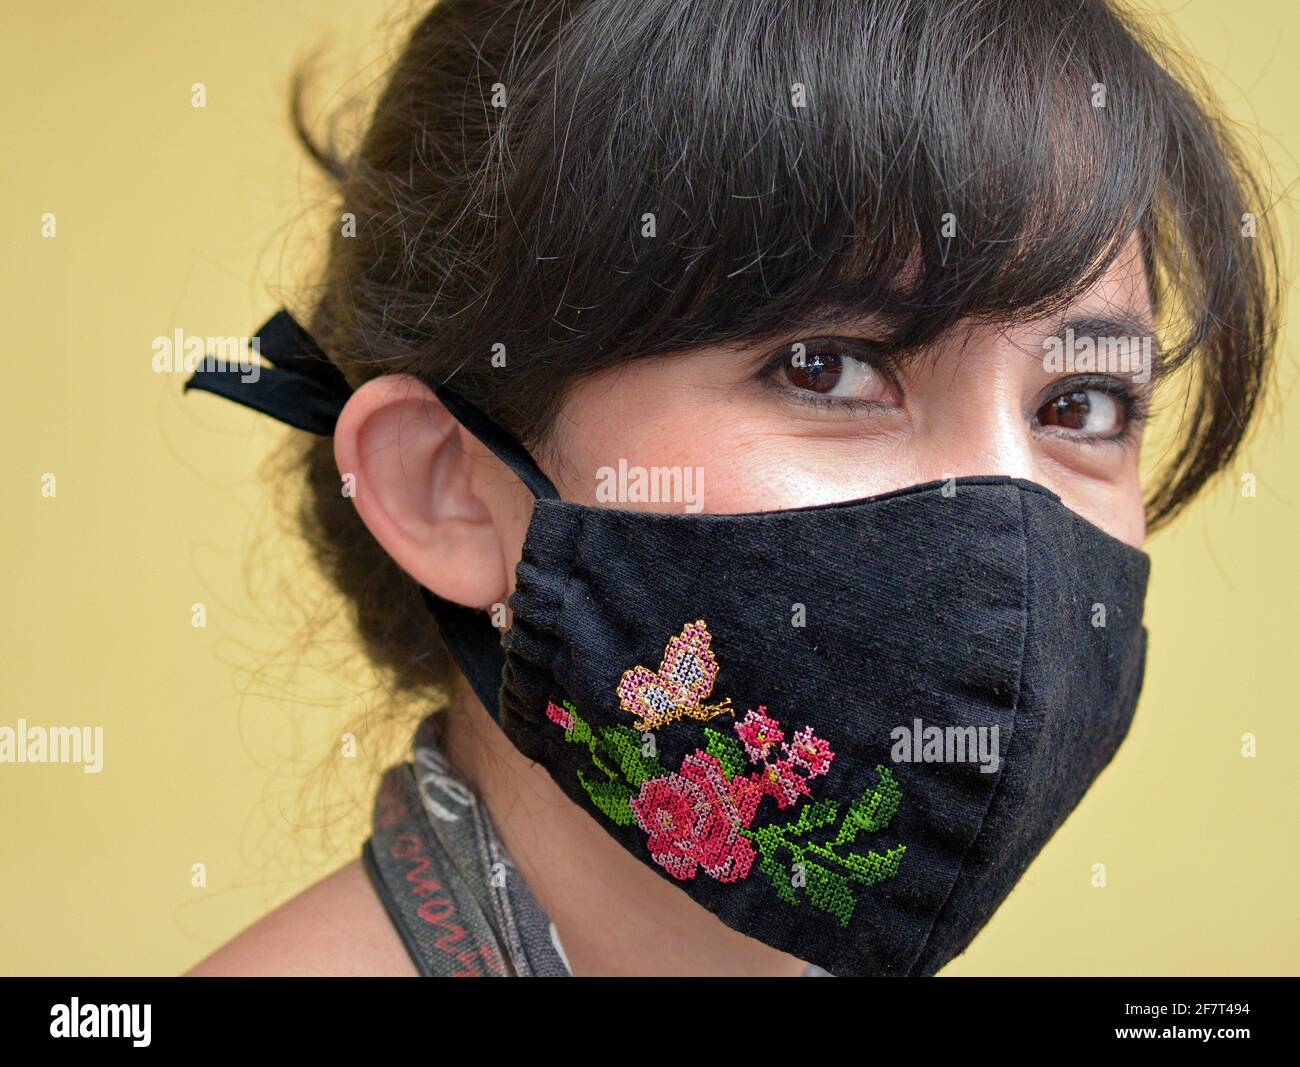 Young Mexican woman with beautiful dark eyes wears a cross-stitched embroidered cloth face mask with floral design during the coronavirus pandemic. Stock Photo